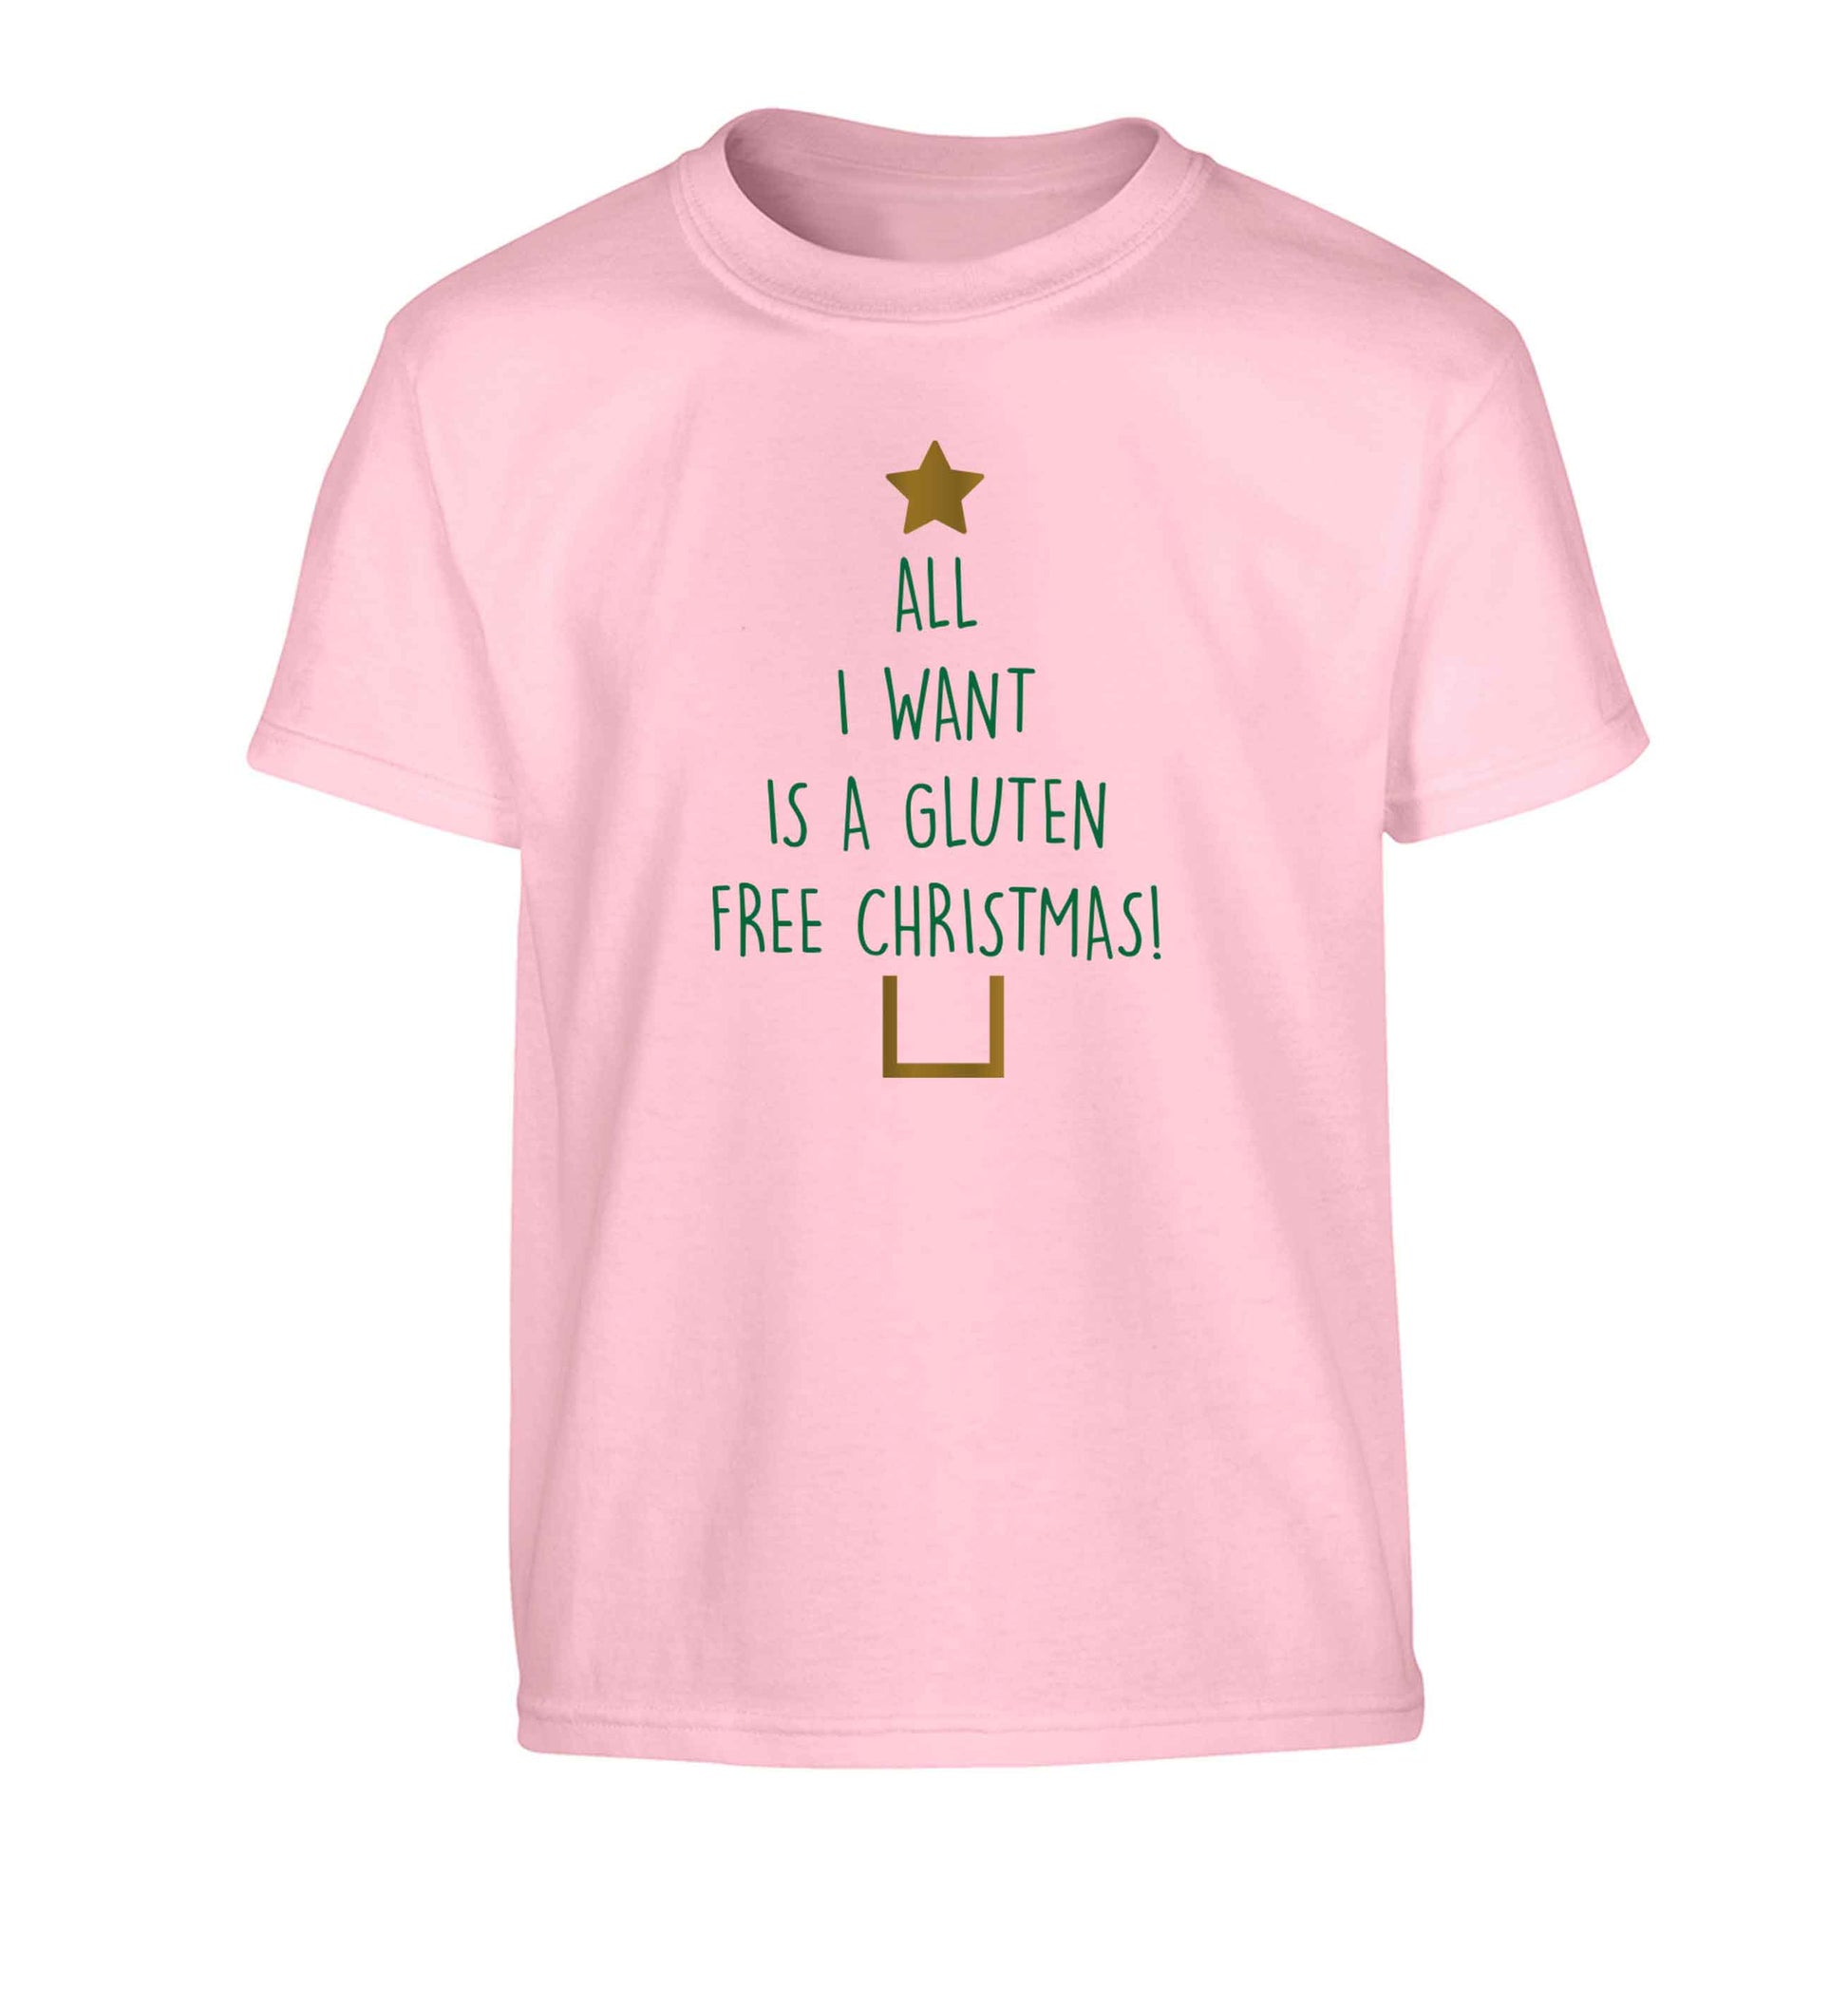 All I want is a gluten free Christmas Children's light pink Tshirt 12-13 Years